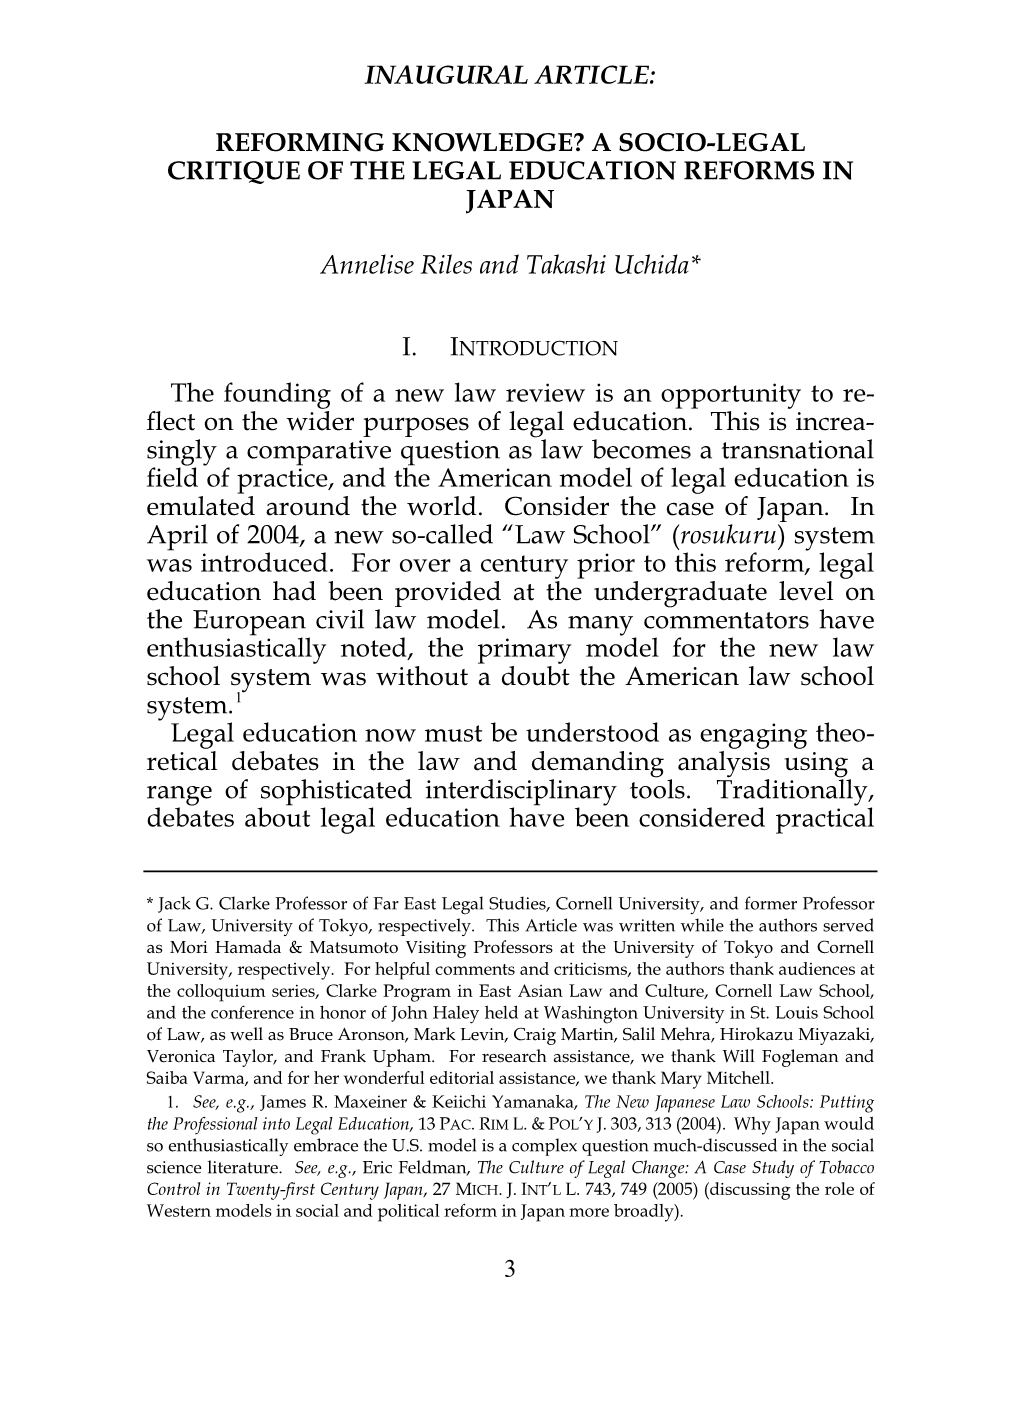 Reforming Knowledge? a Socio-Legal Critique of the Legal Education Reforms in Japan